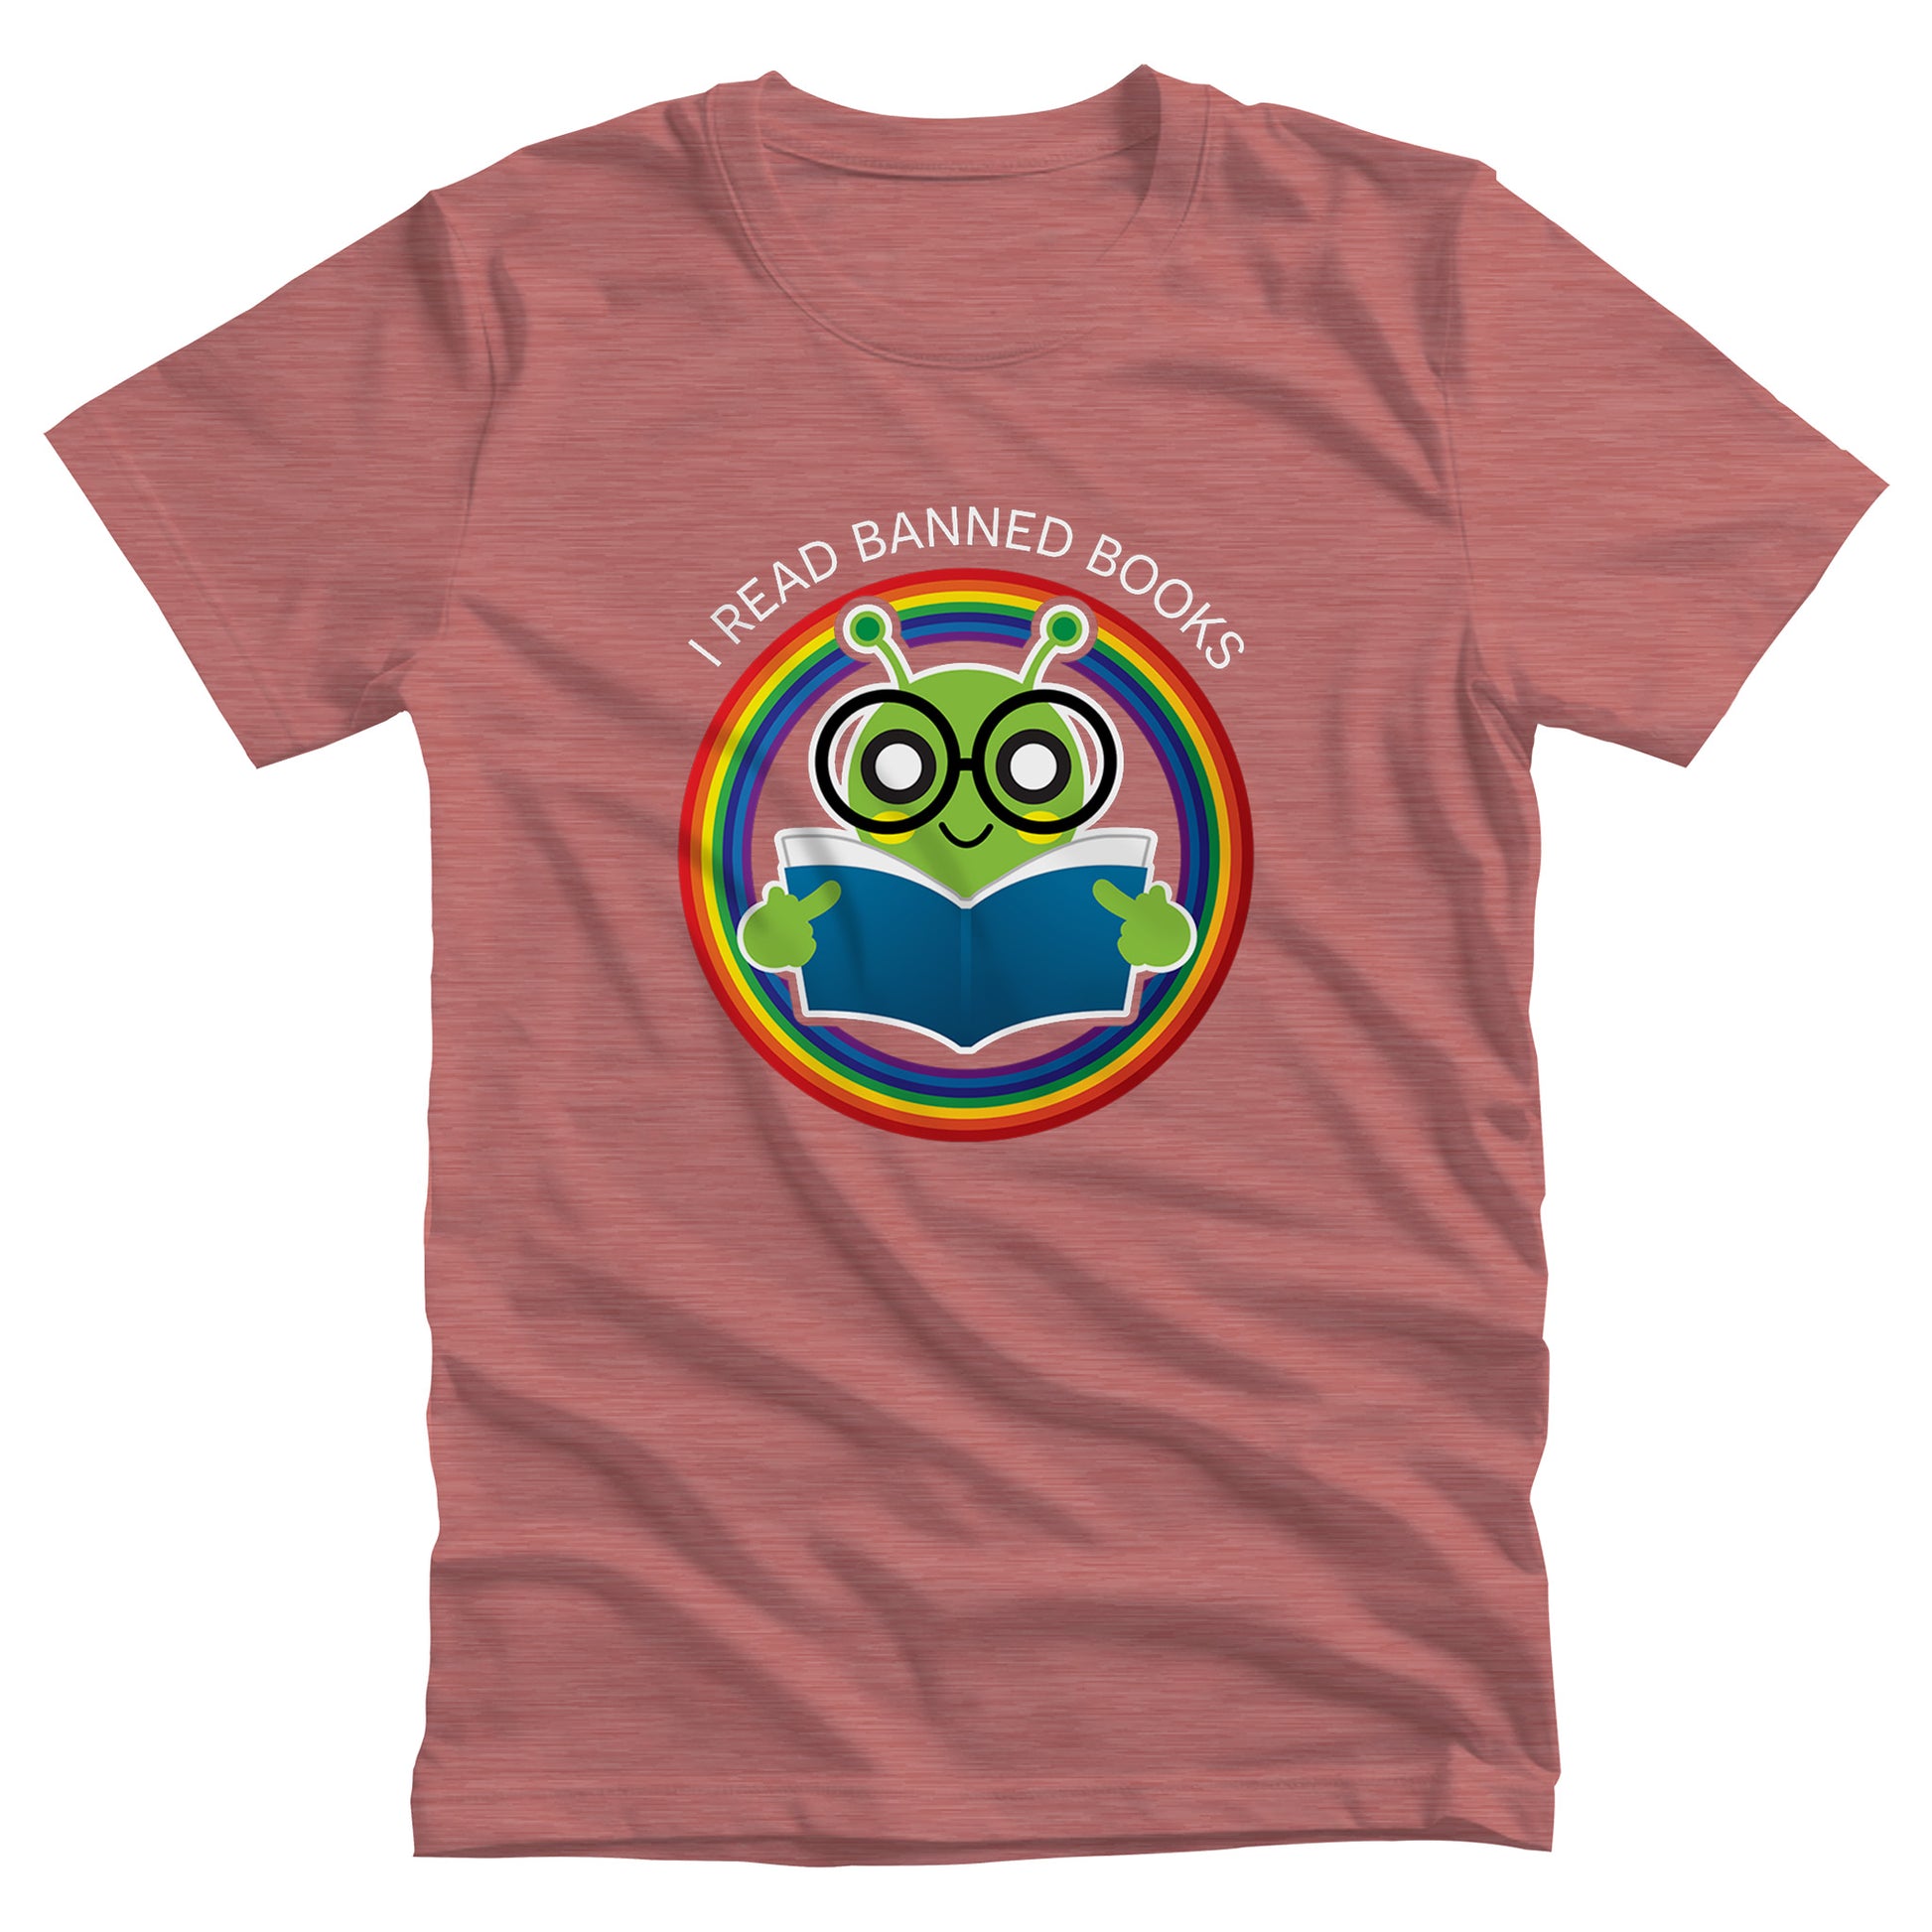 Heather Mauve color unisex t-shirt with a graphic of a bookworm with large eyeglasses reading a book. The bookworm is subtly holding up its middle fingers. The image is inside a circle that has rainbow colors. Arched over the top of the graphic are the words “I READ BANNED BOOKS.”